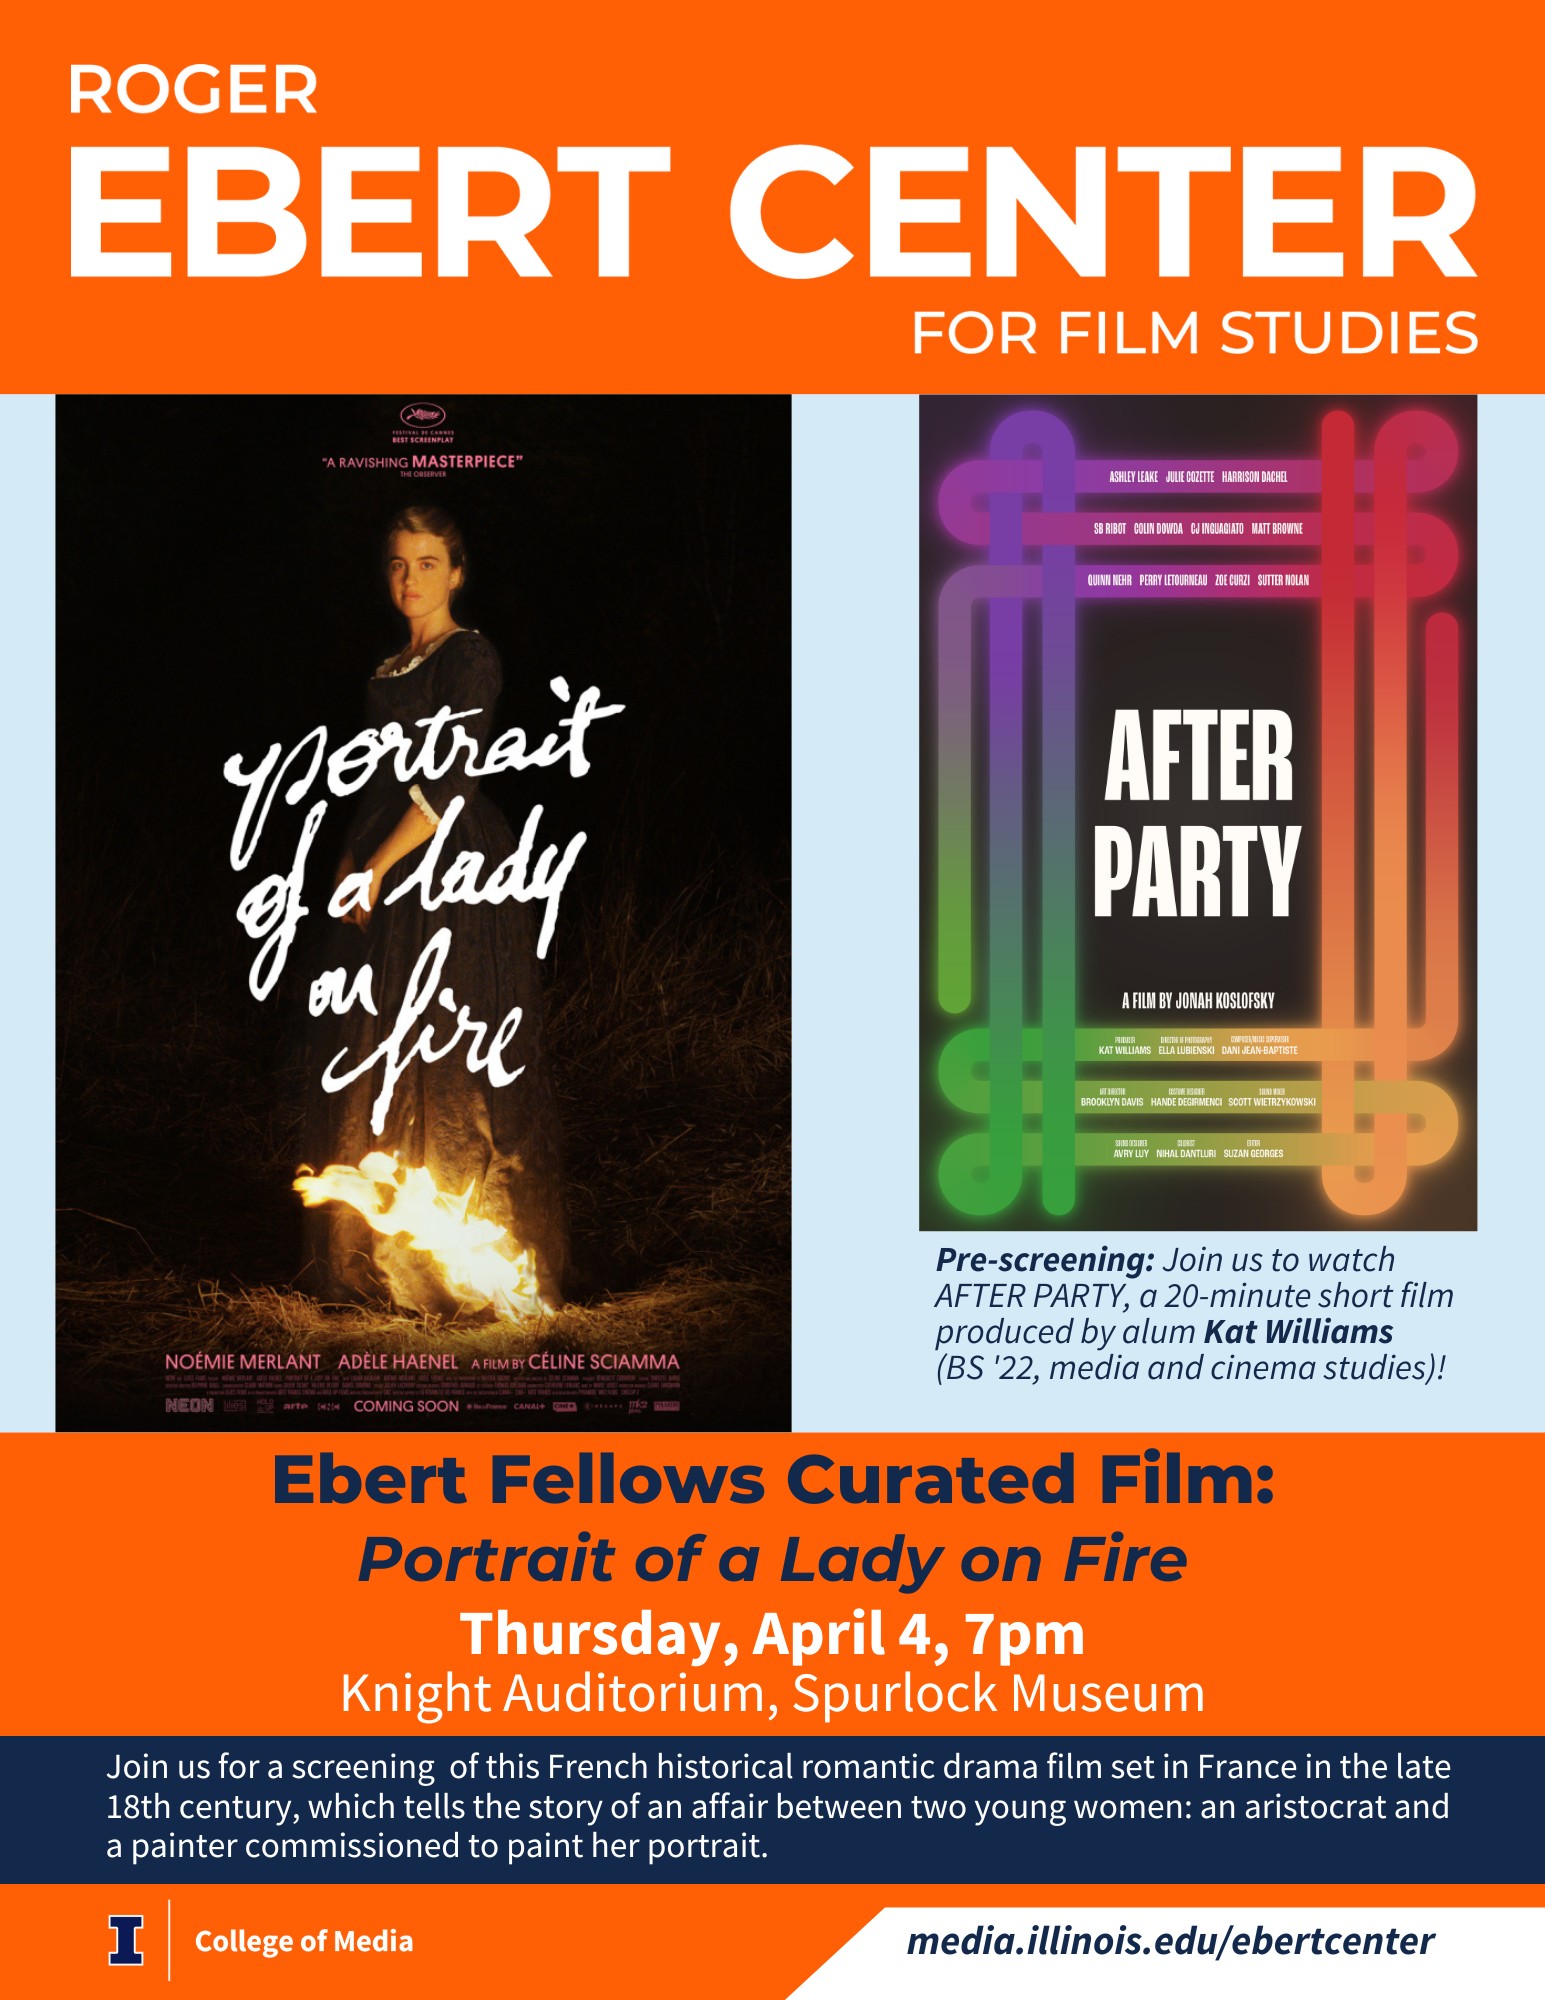 A Roger Ebert Center flyer displaying the film posters and event information duplicated elsewhere in the post